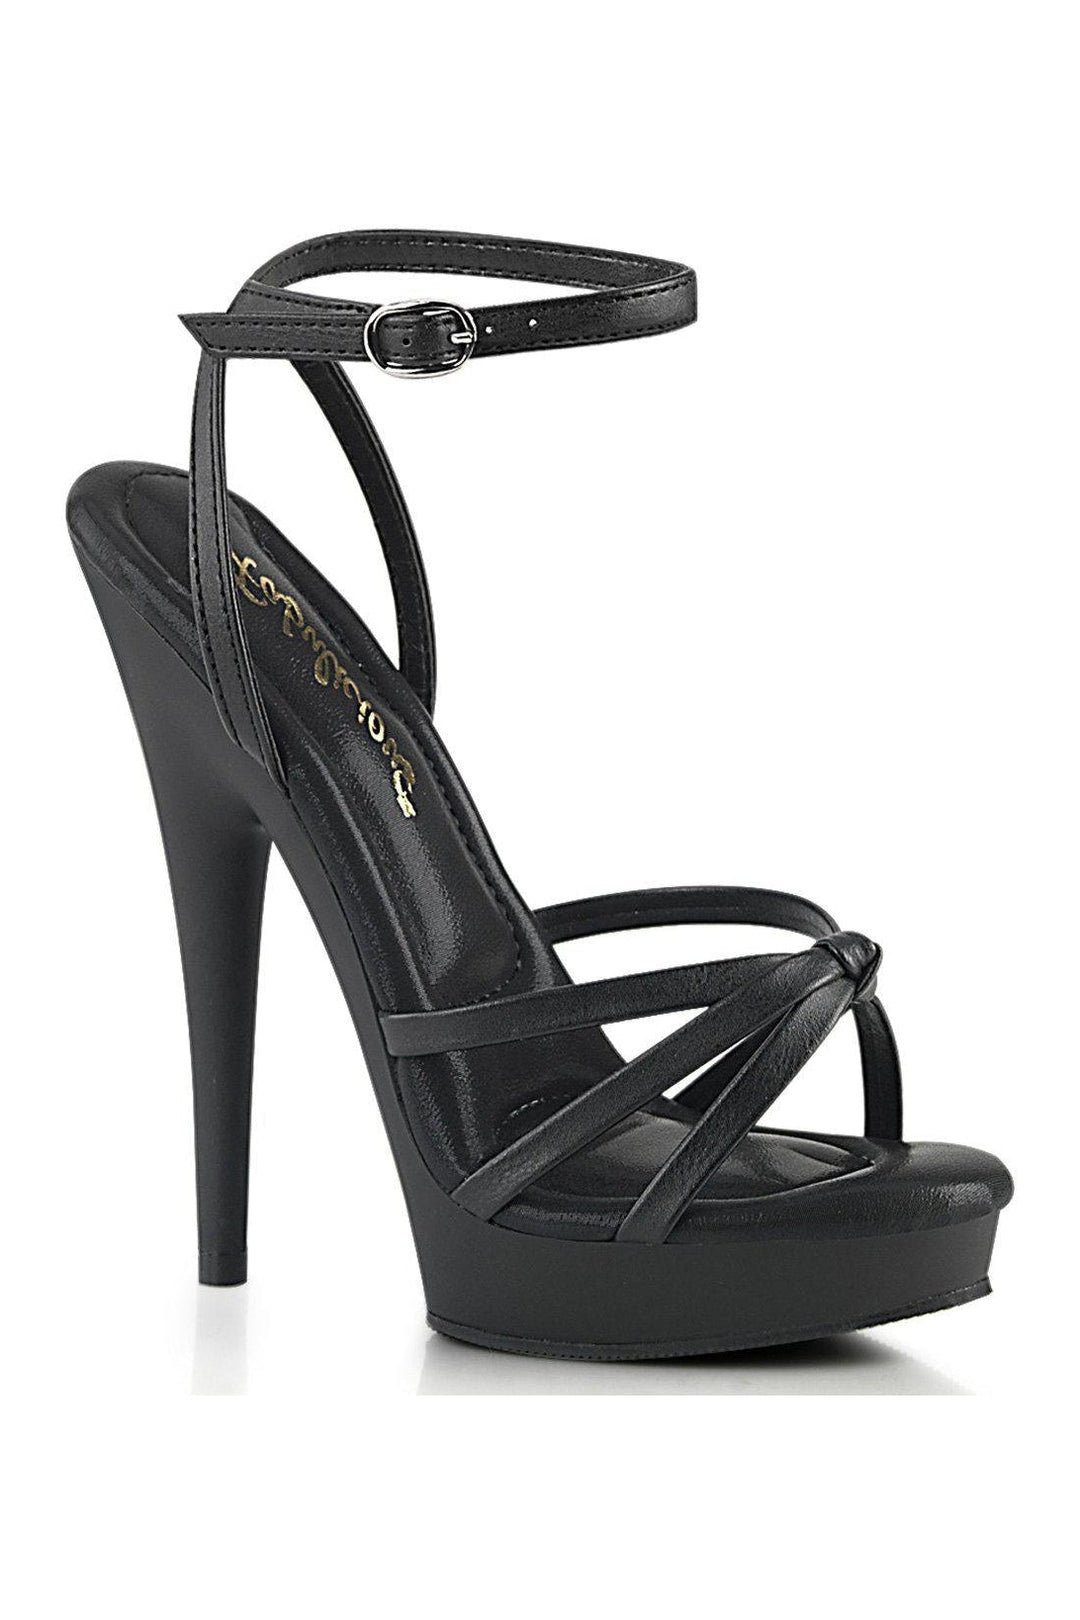 SULTRY-638 Sandal | Black Faux Leather-Sandals-Fabulicious-Black-7-Faux Leather-SEXYSHOES.COM